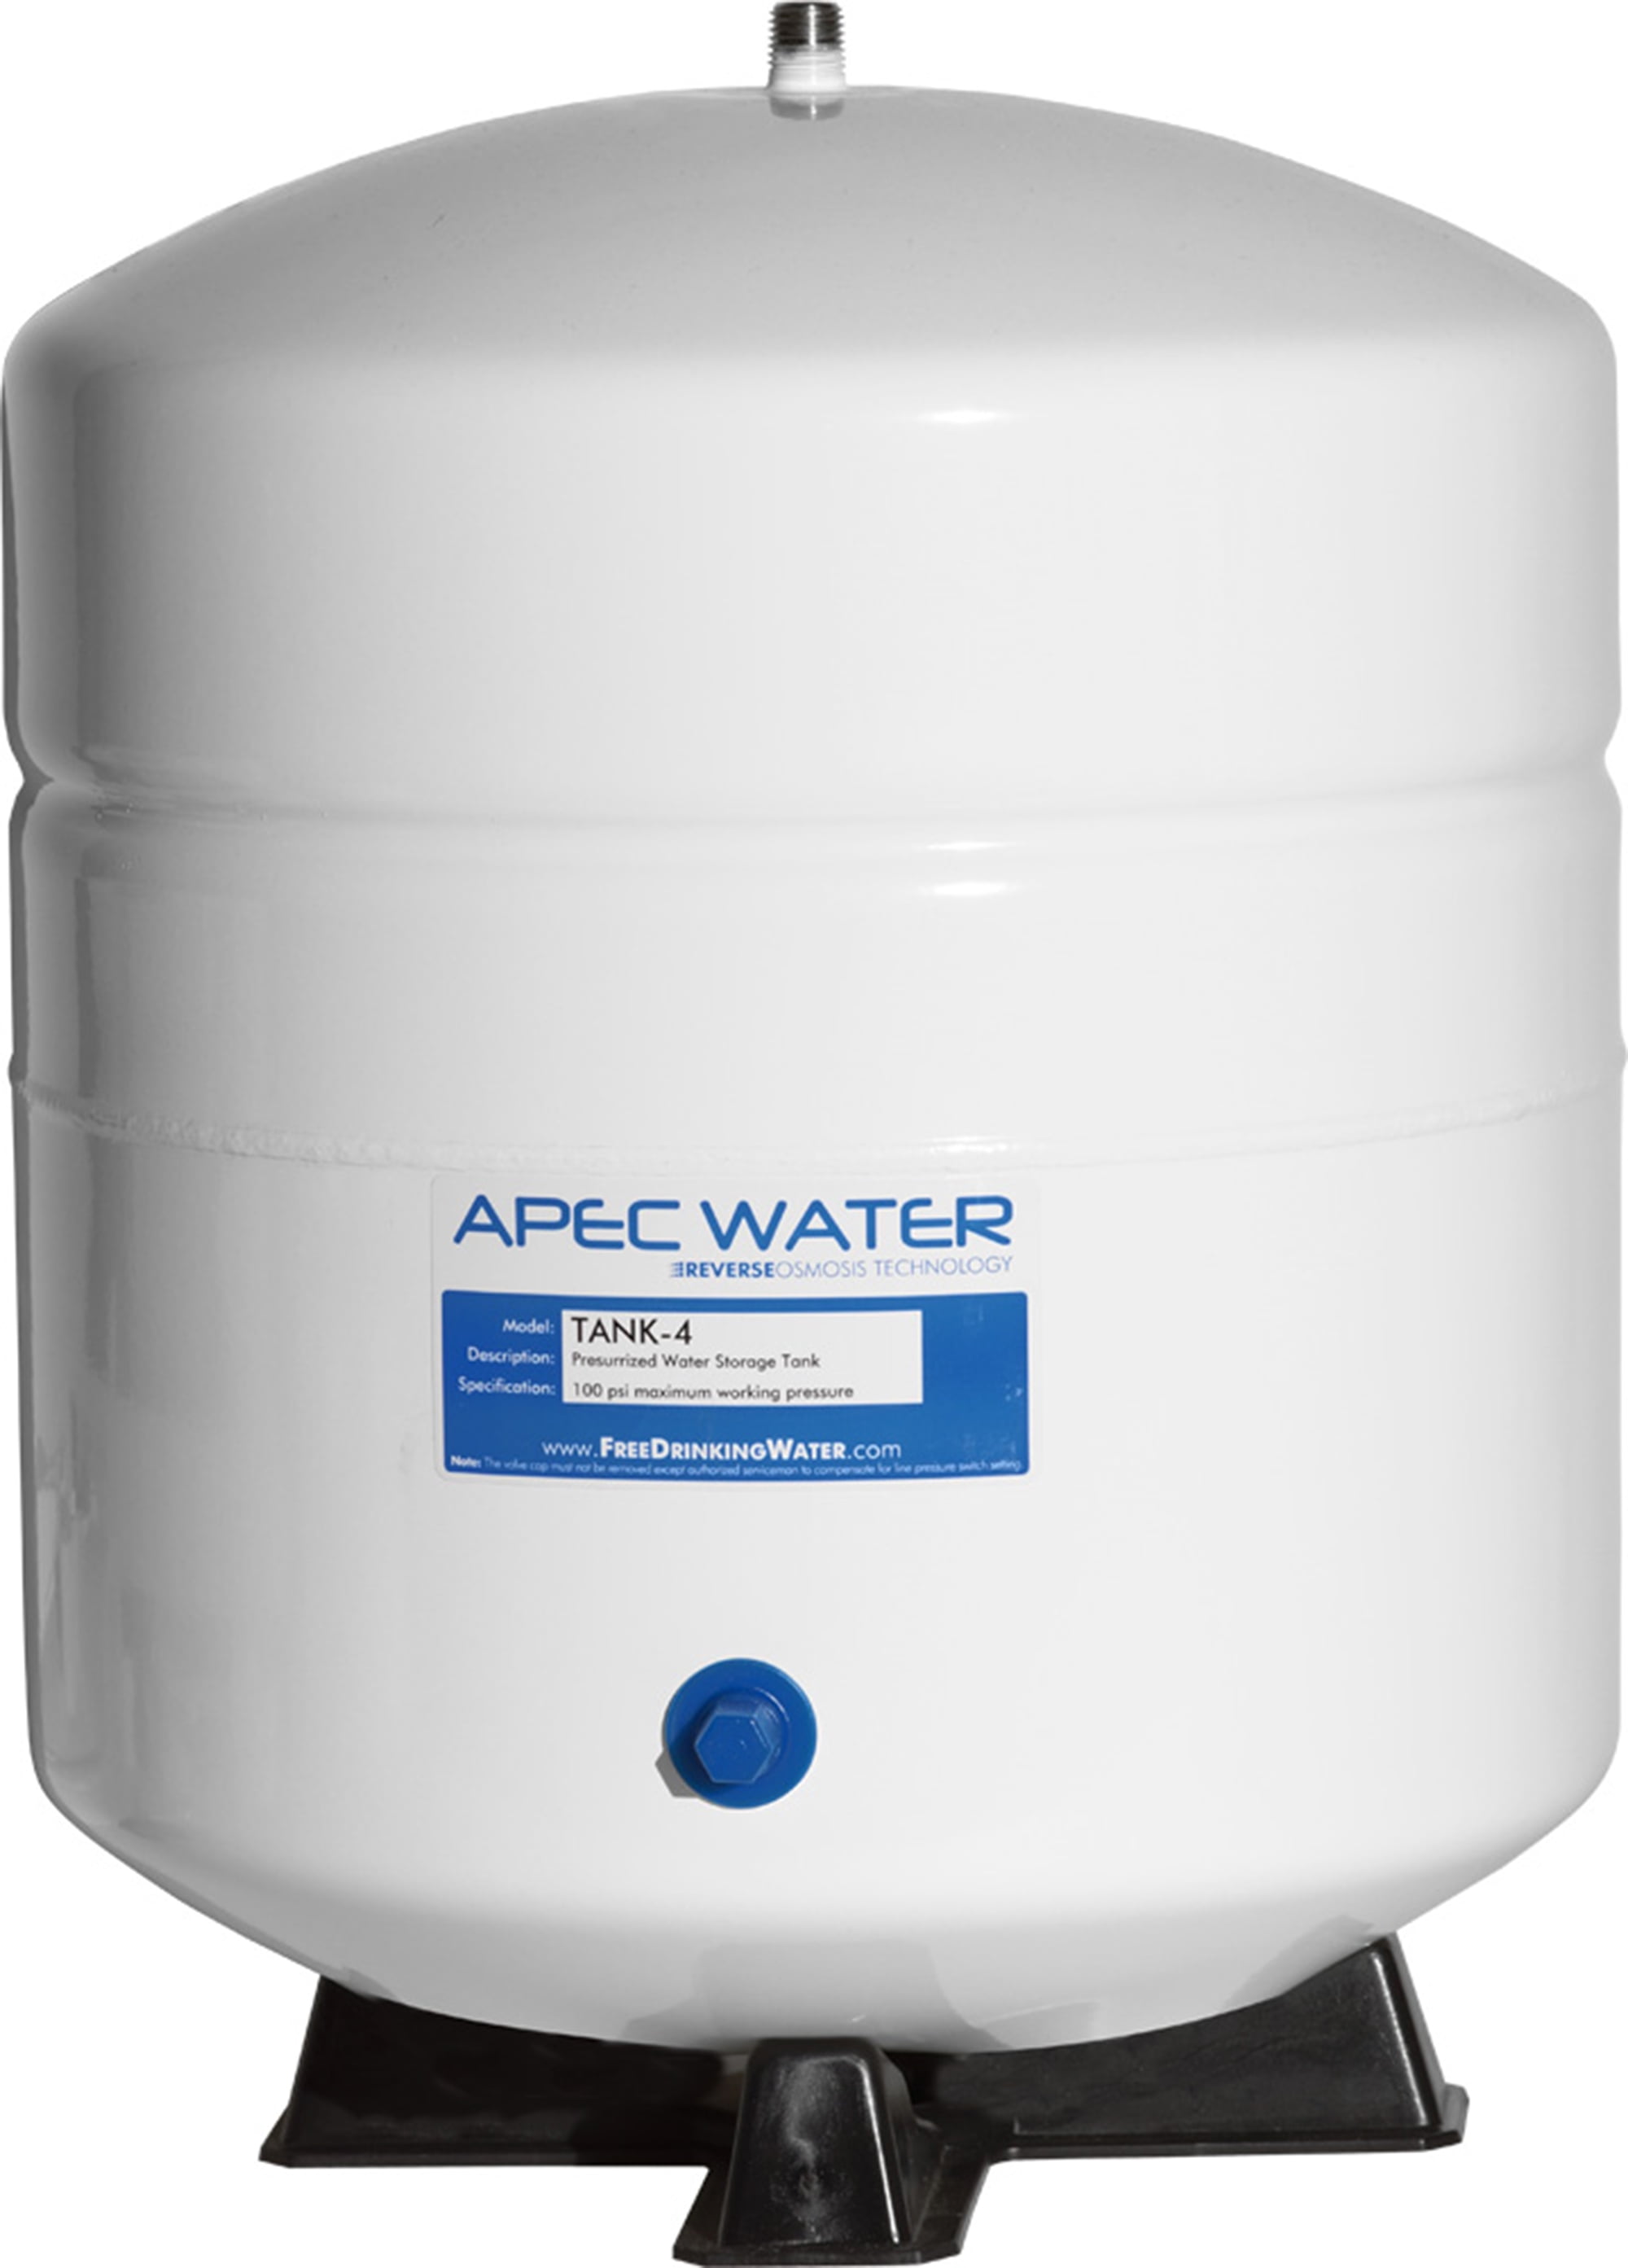 APEC Water Systems - #1 US Manufacturer of Reverse Osmosis